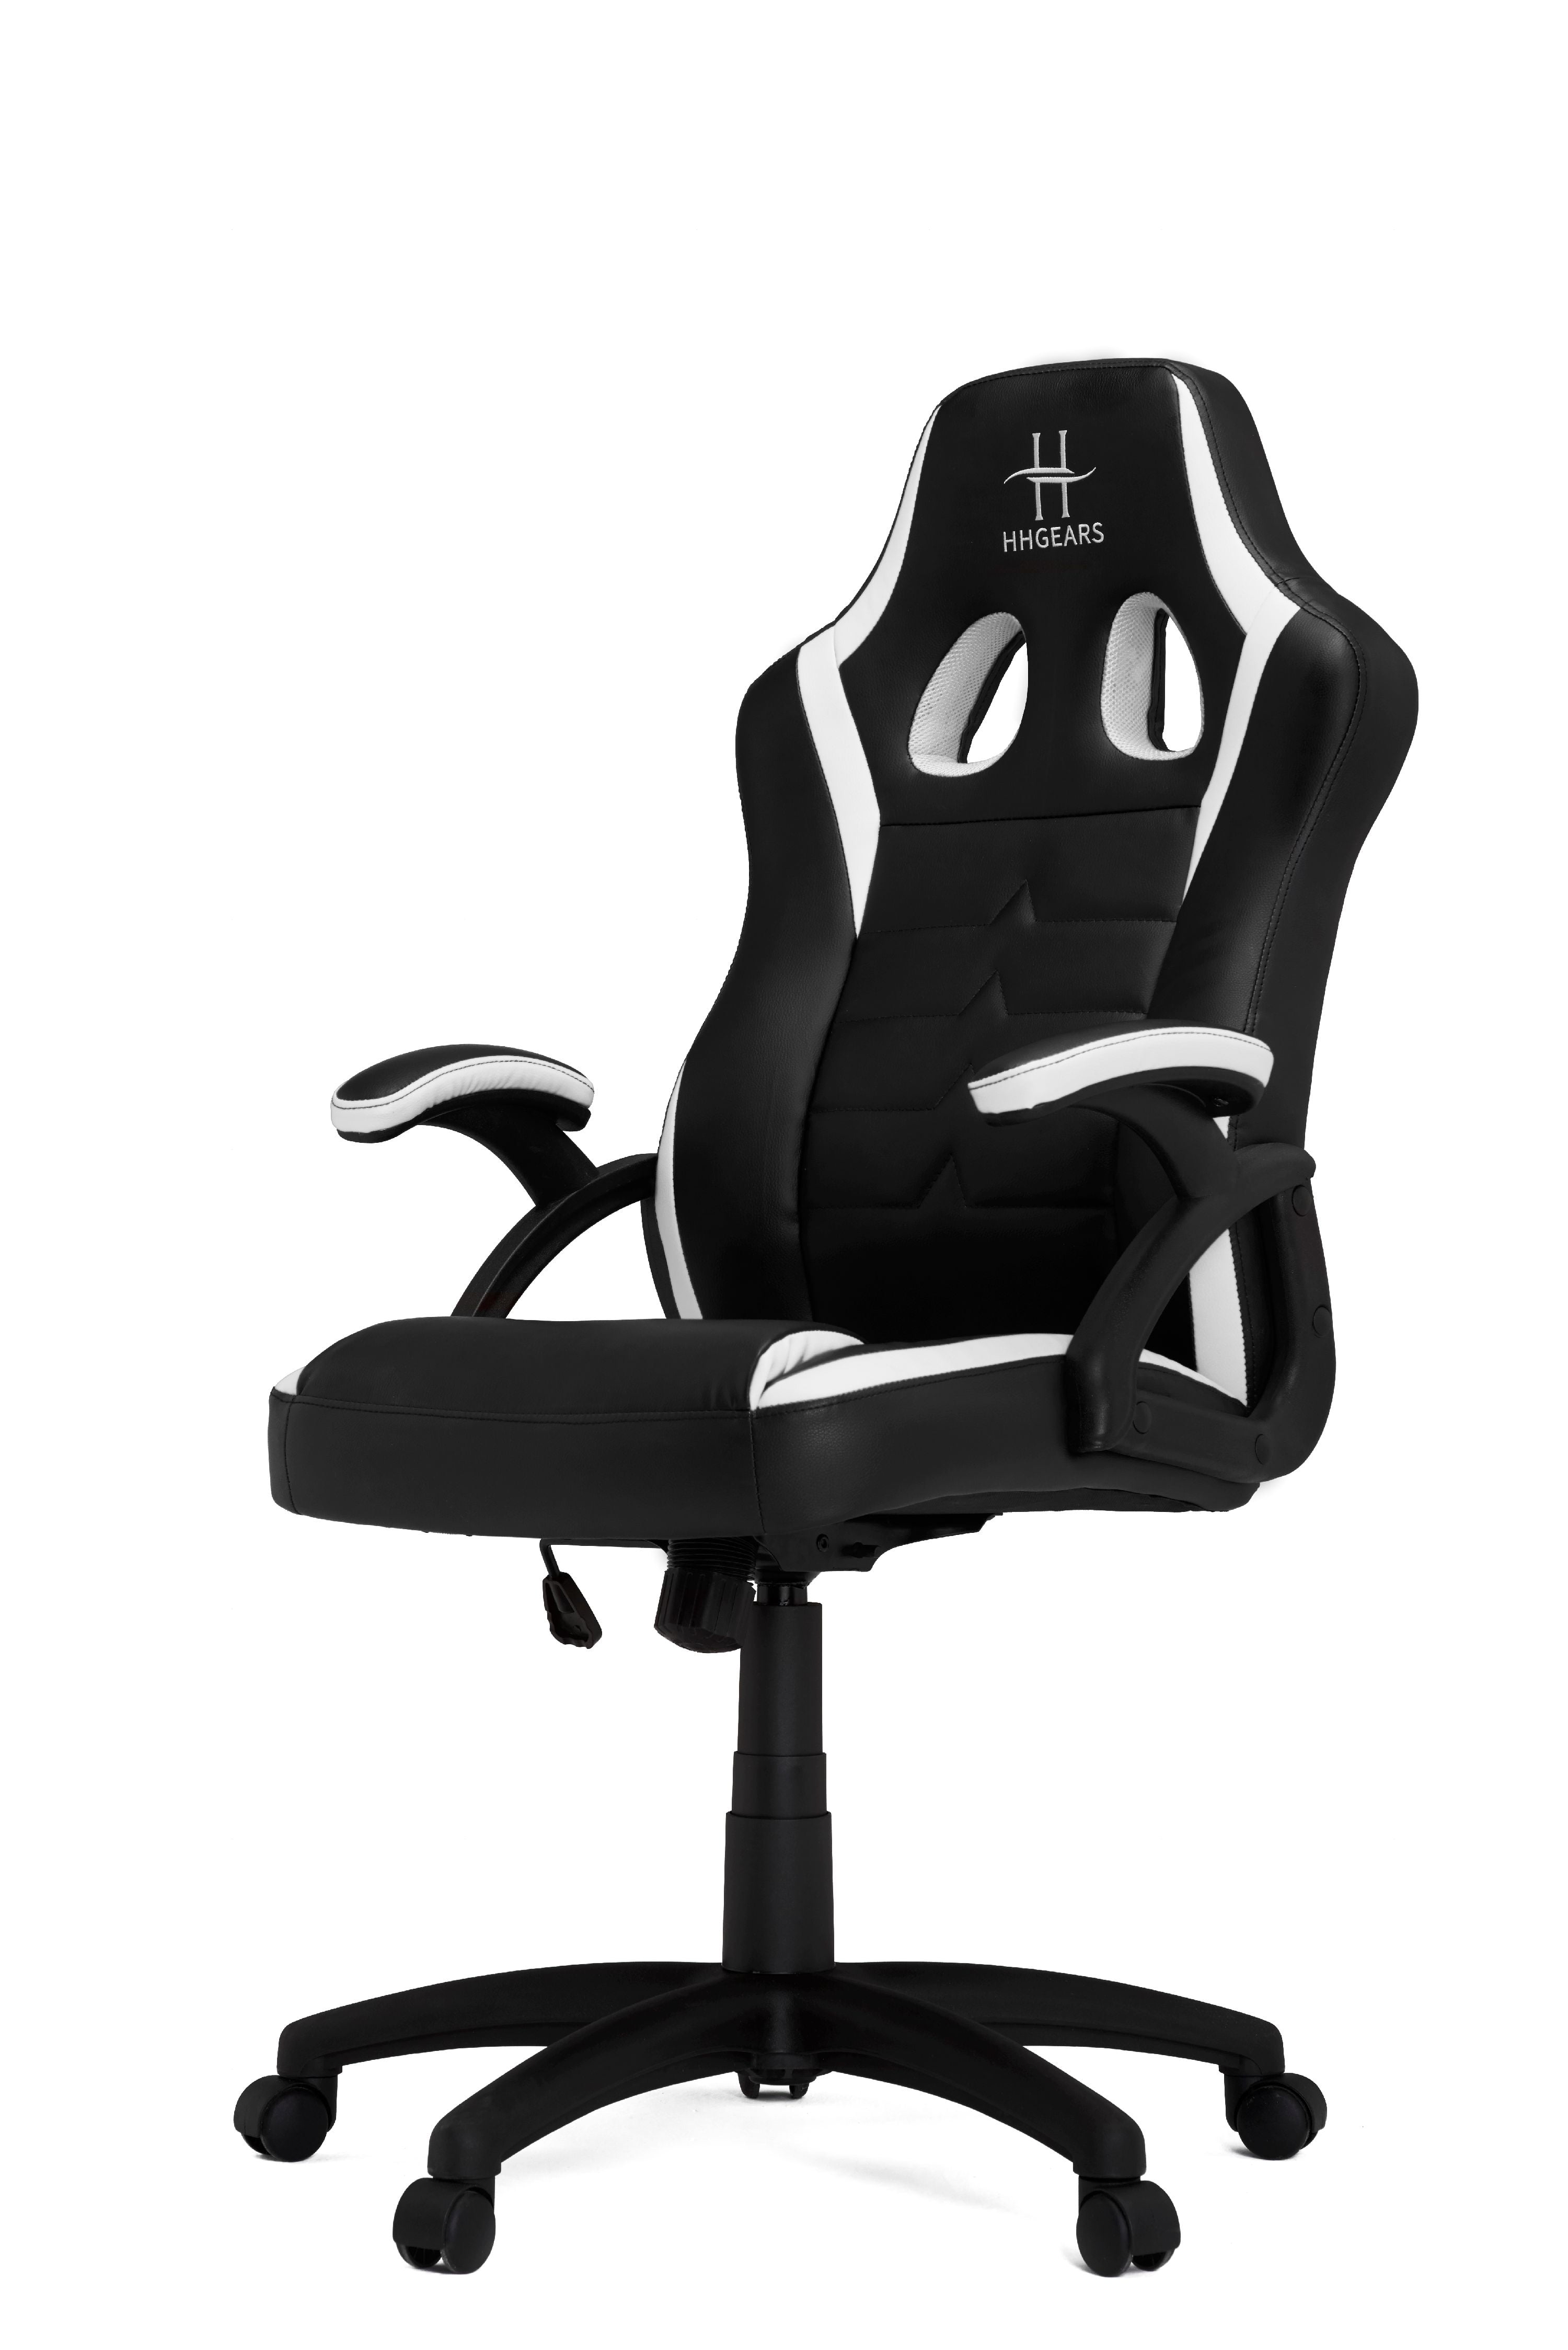 HHGears SM115 Gaming Chair Black and White